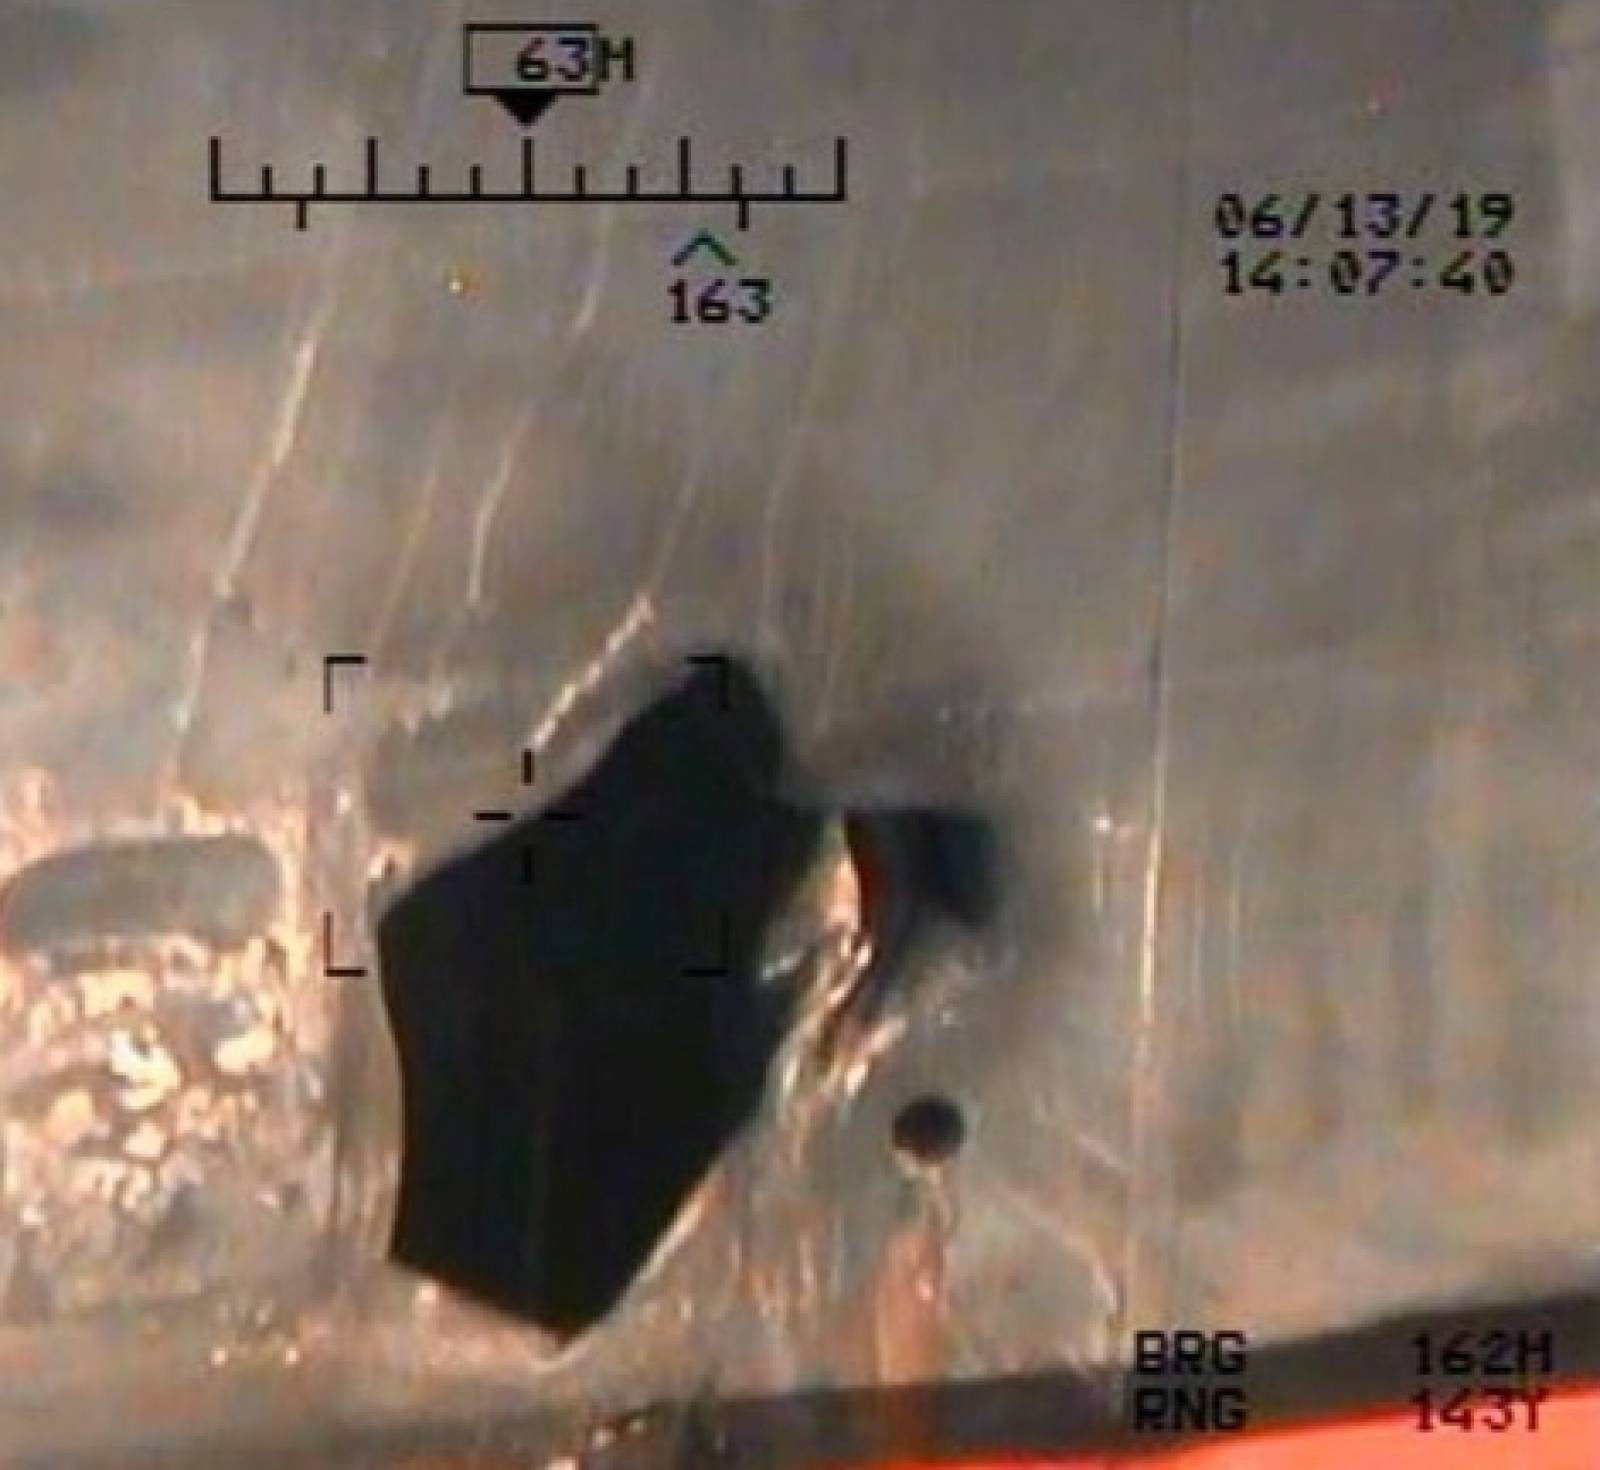 U.S. Pentagon in Washington releases handout imagery that it says shows damage from mines to commercial ships in Gulf of Oman